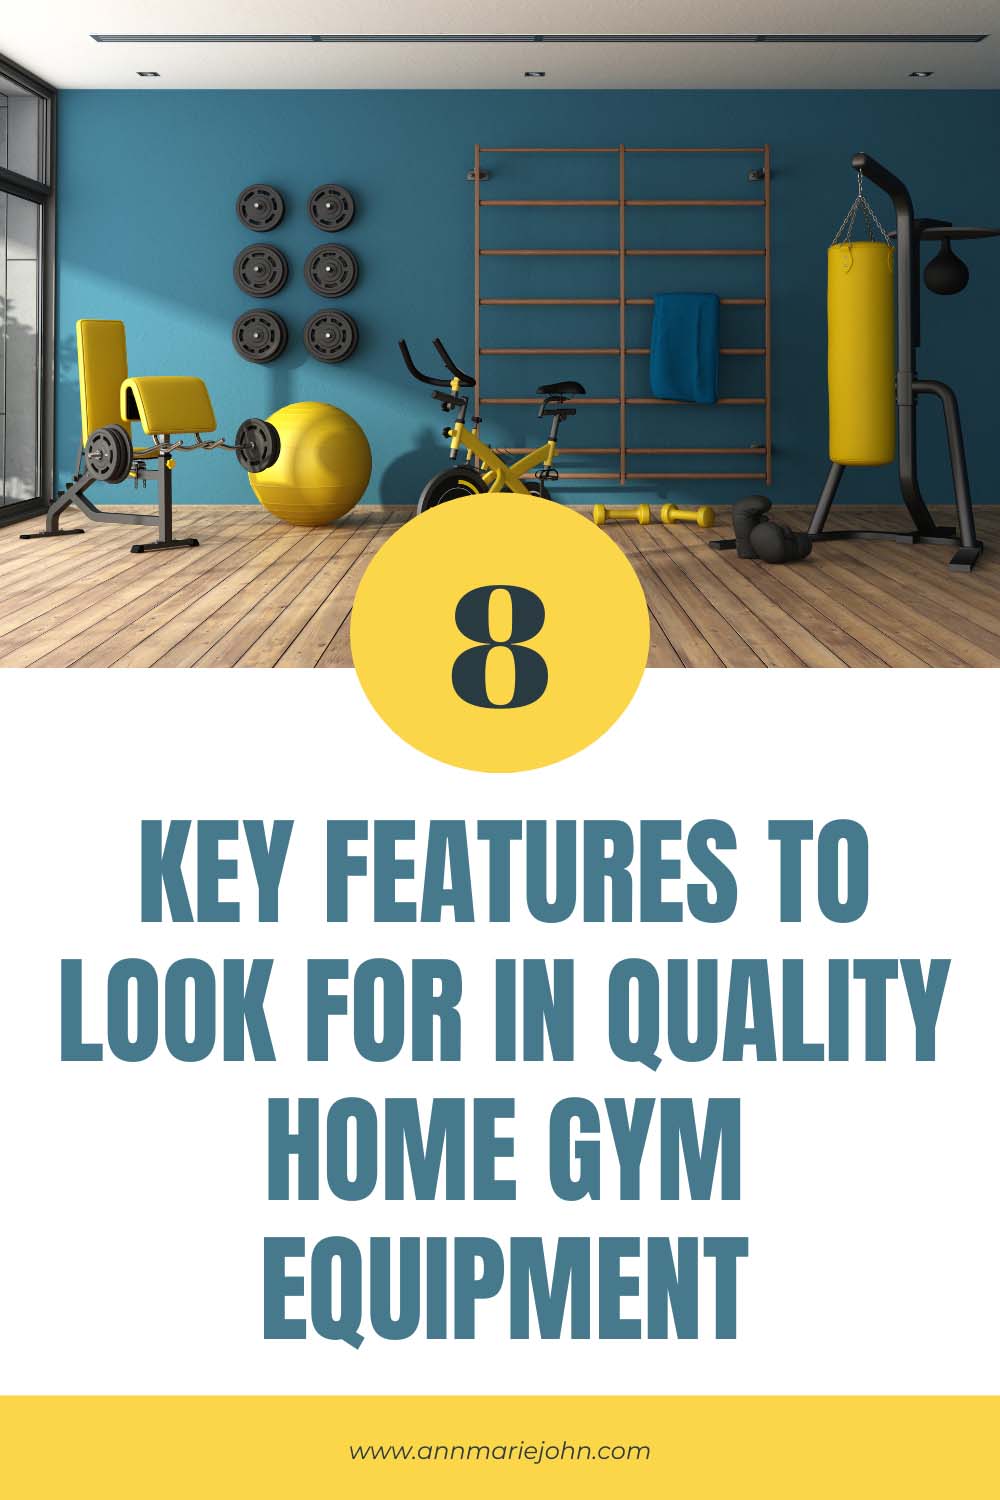 Key Features to Look for In Quality Home Gym Equipment